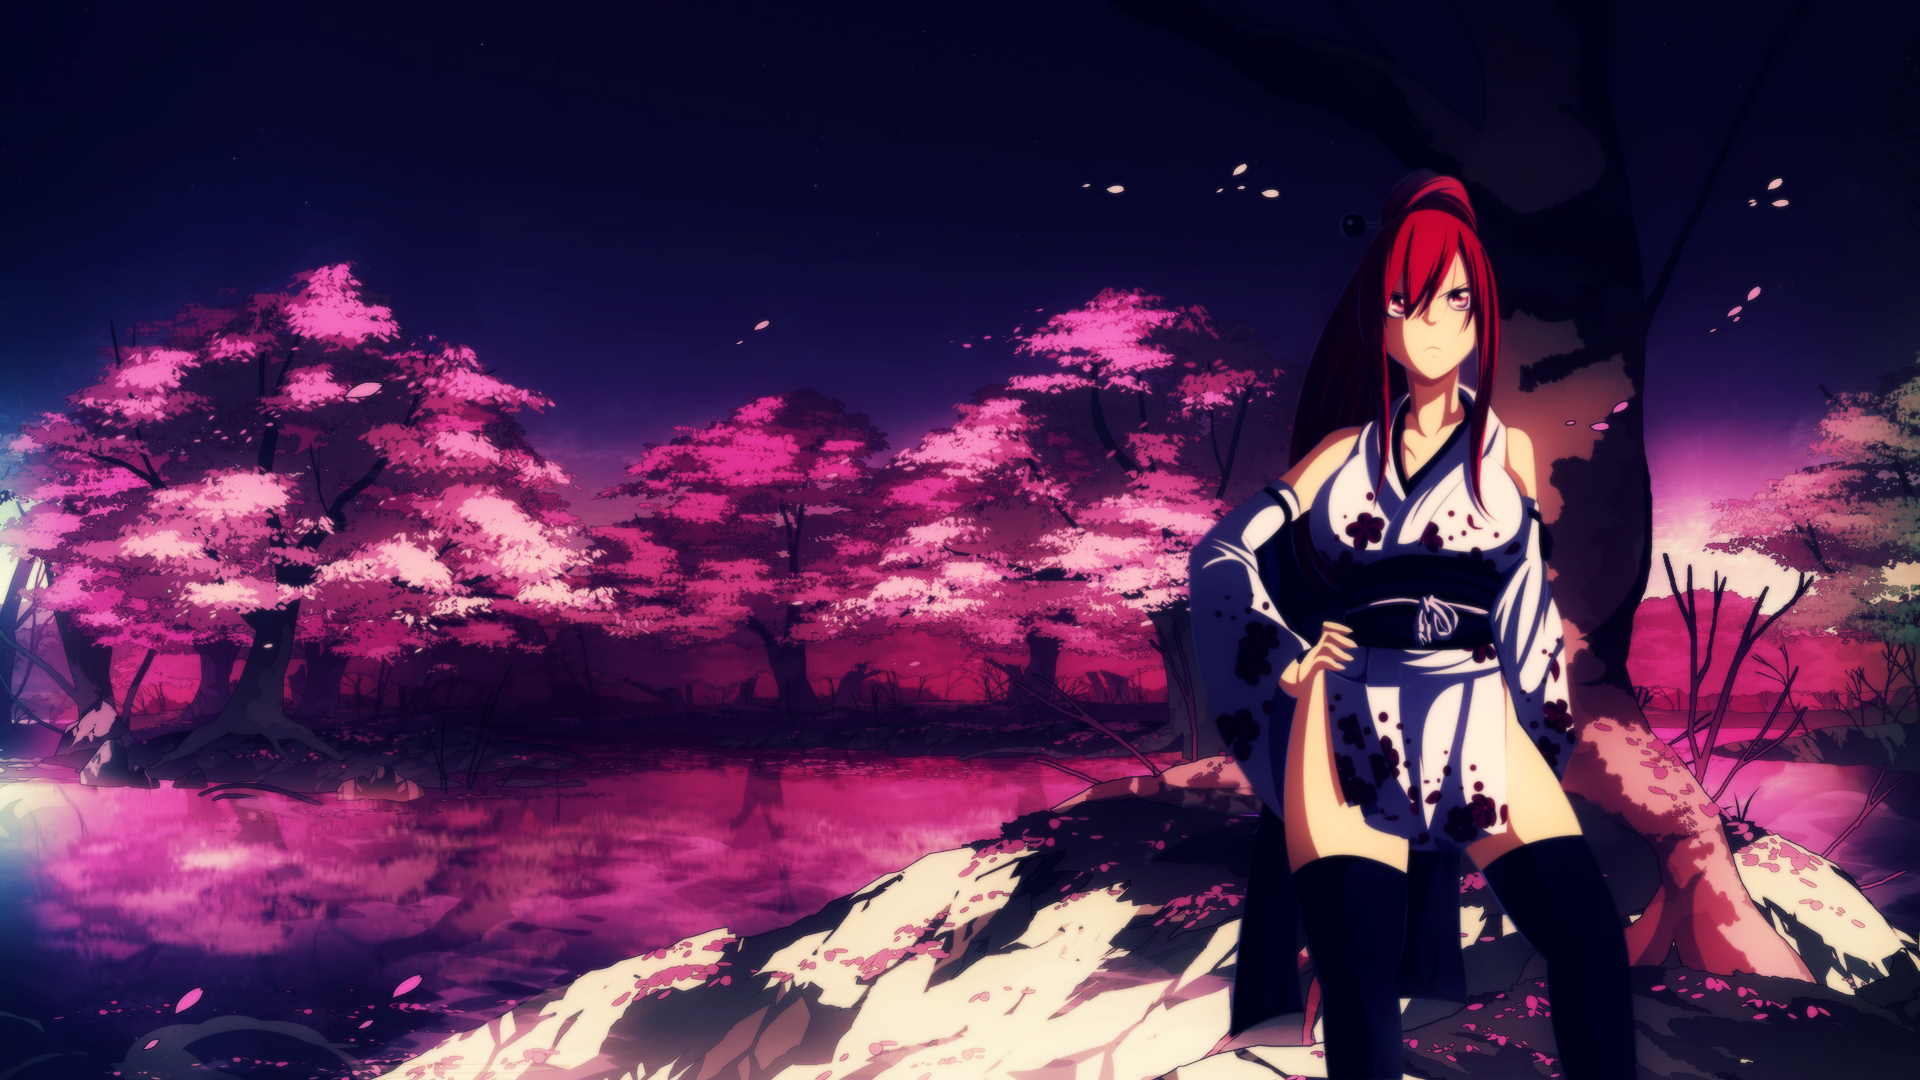 Fairy Tail 454 Erza Scarlet by Kisi86 | Daily Anime Art